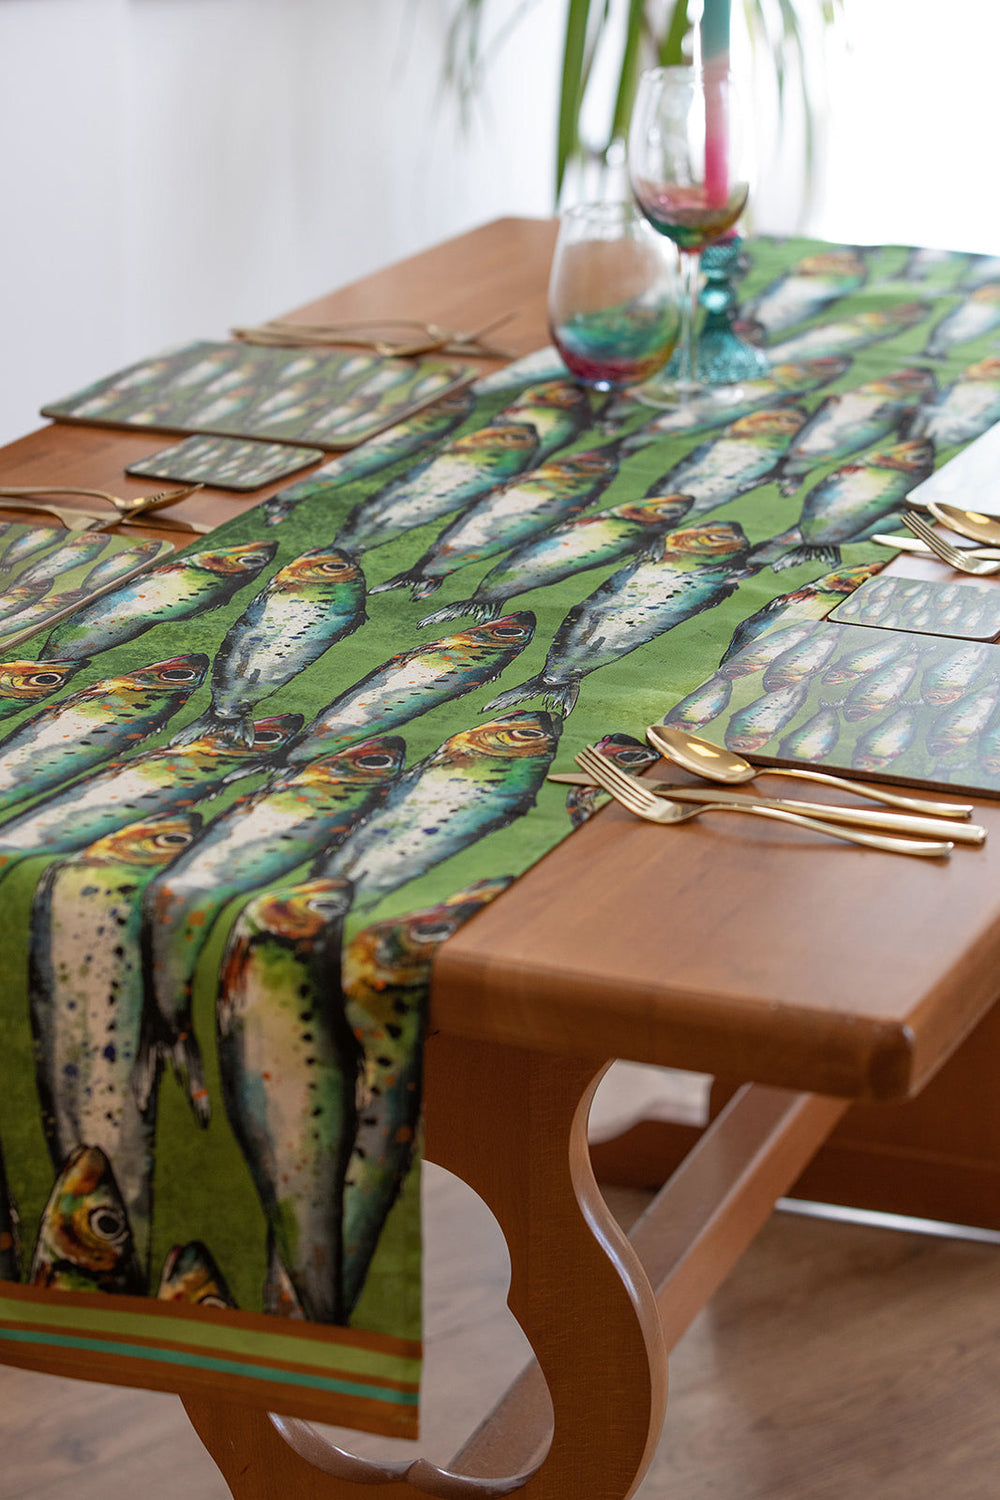 Dolly hot dogs table runners